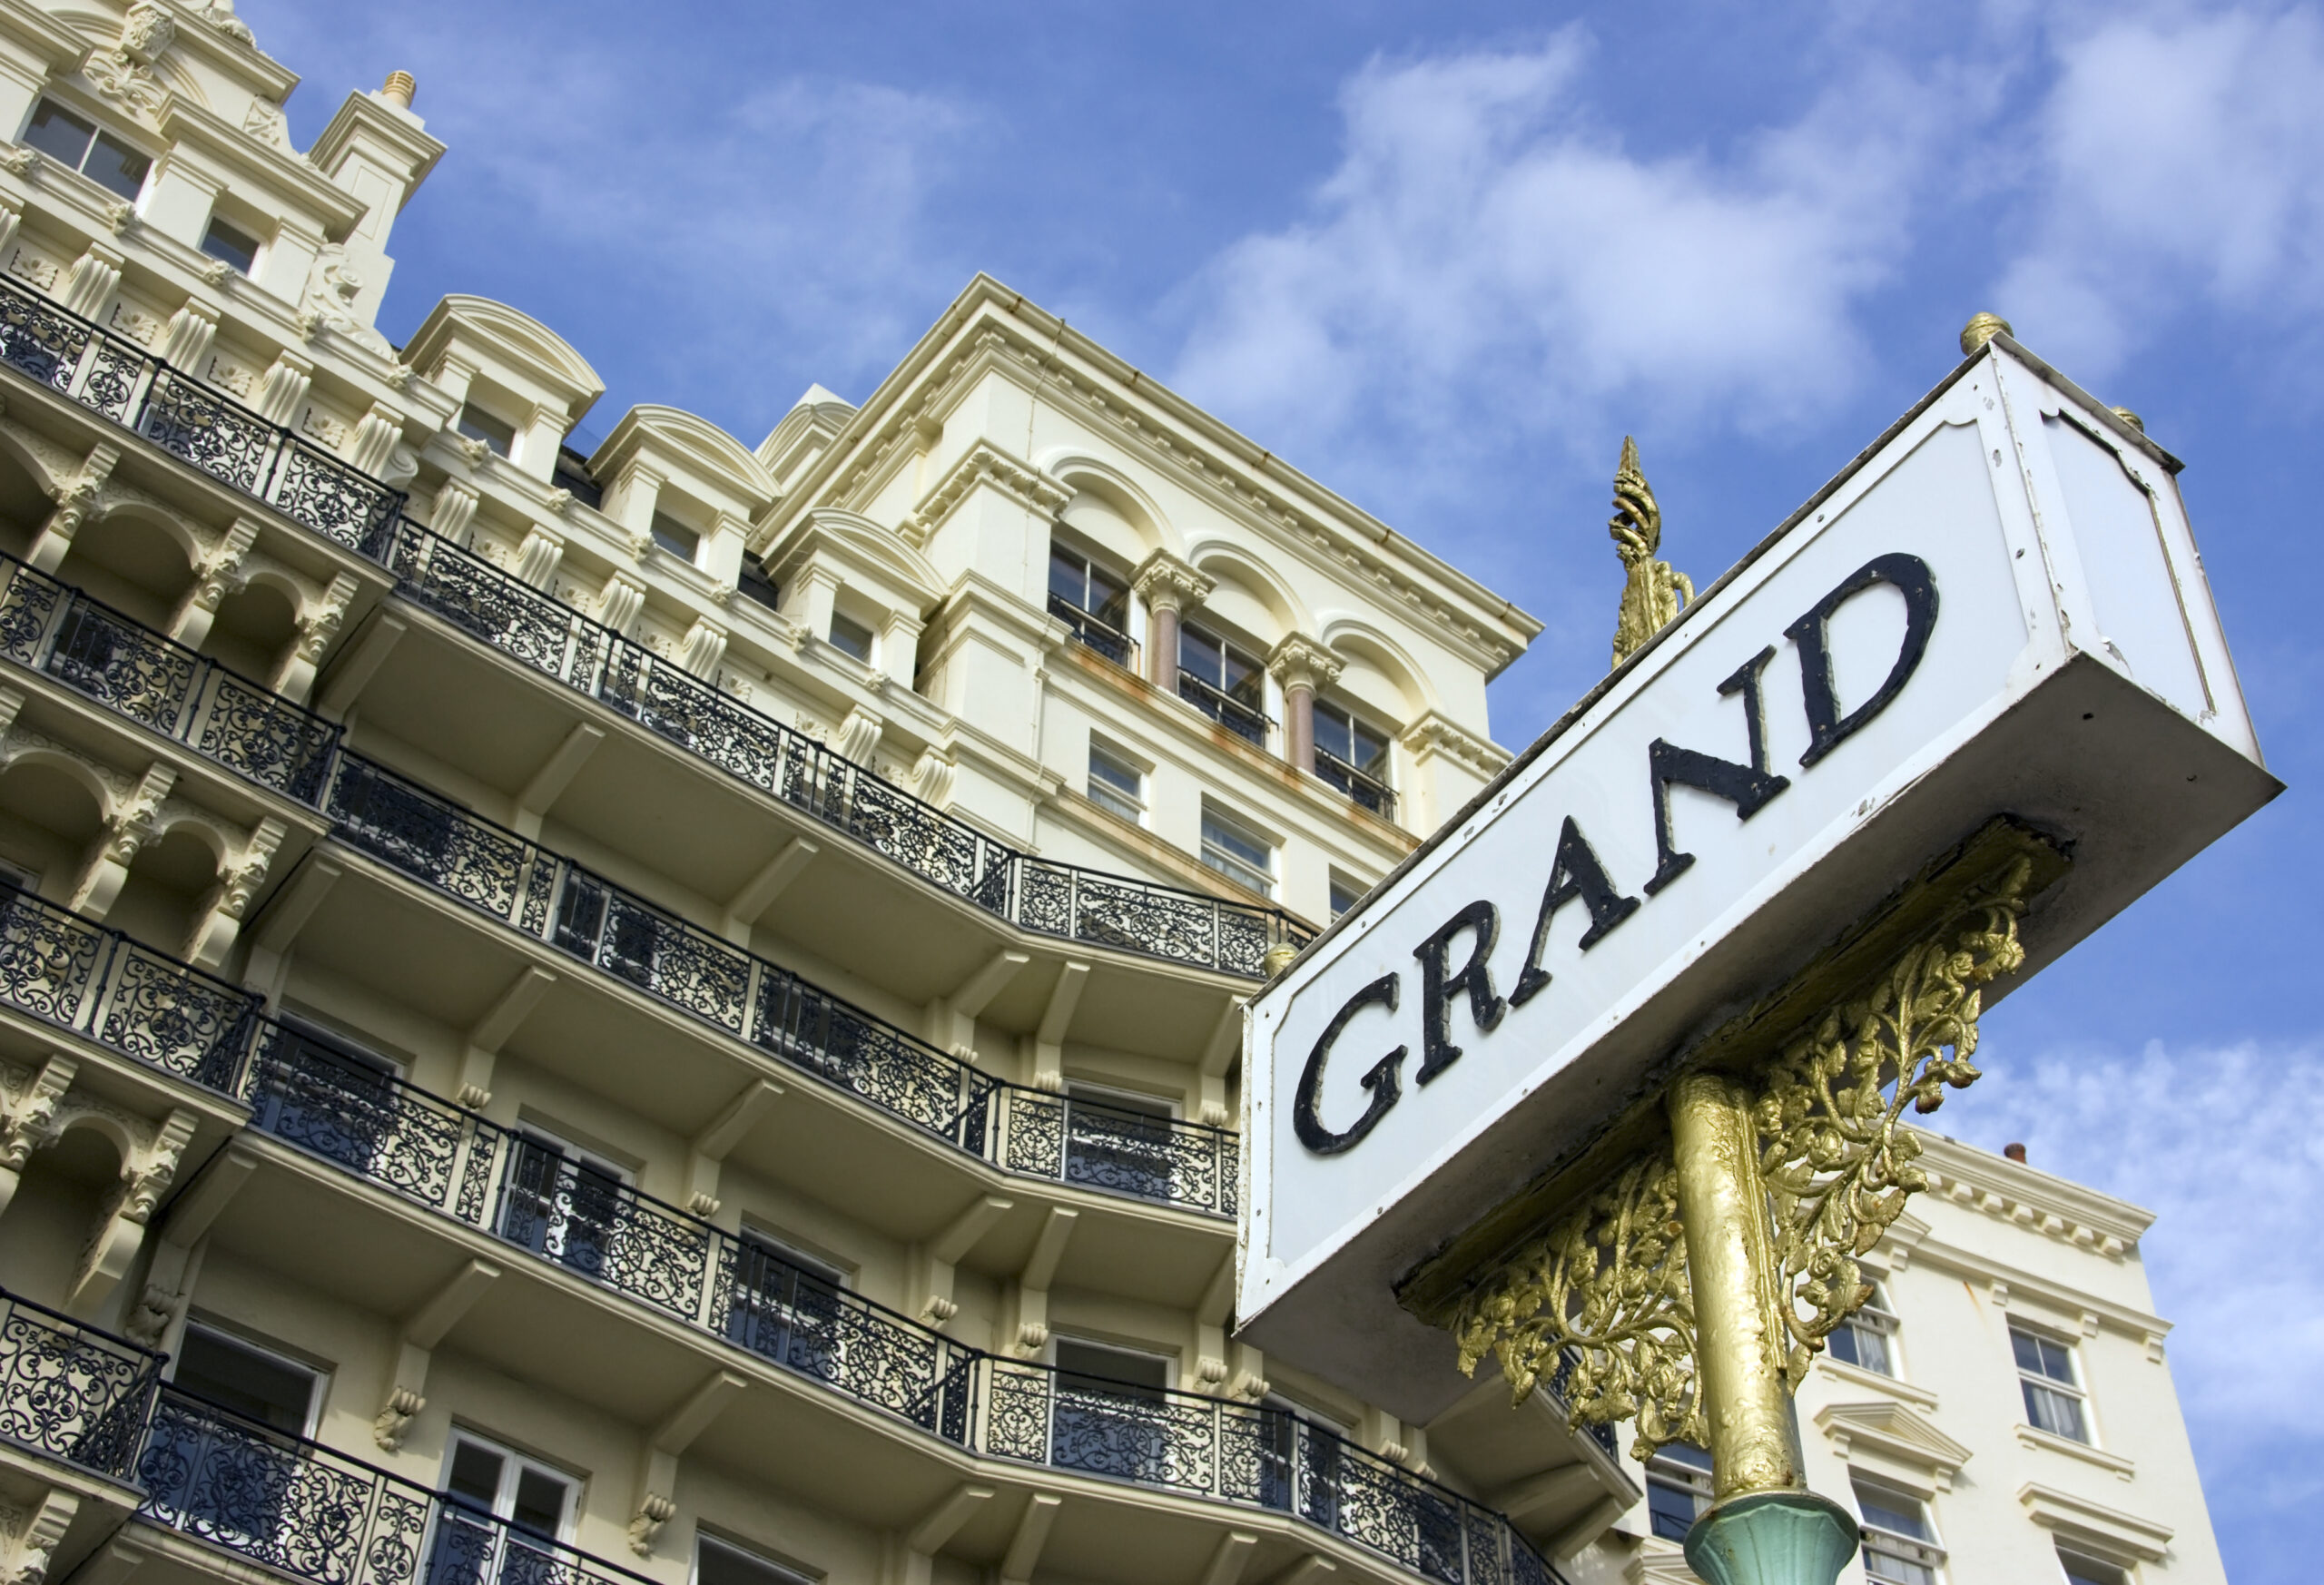 Experience Luxury: Own a Piece of The Grand Brighton’s Iconic Furniture